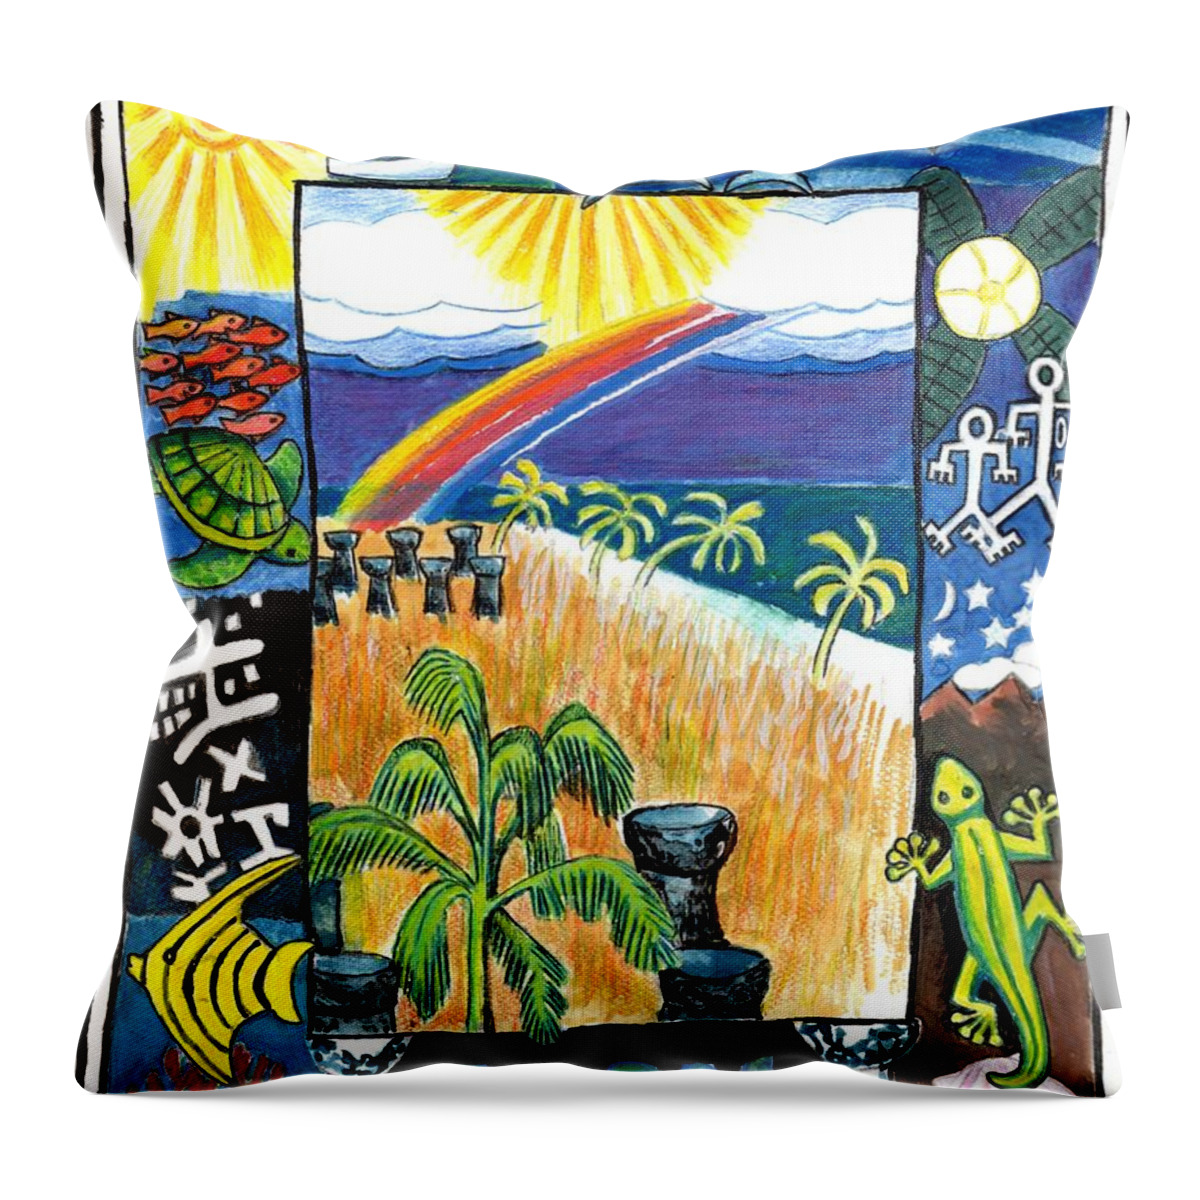 Guam Throw Pillow featuring the painting Guam by Genevieve Esson